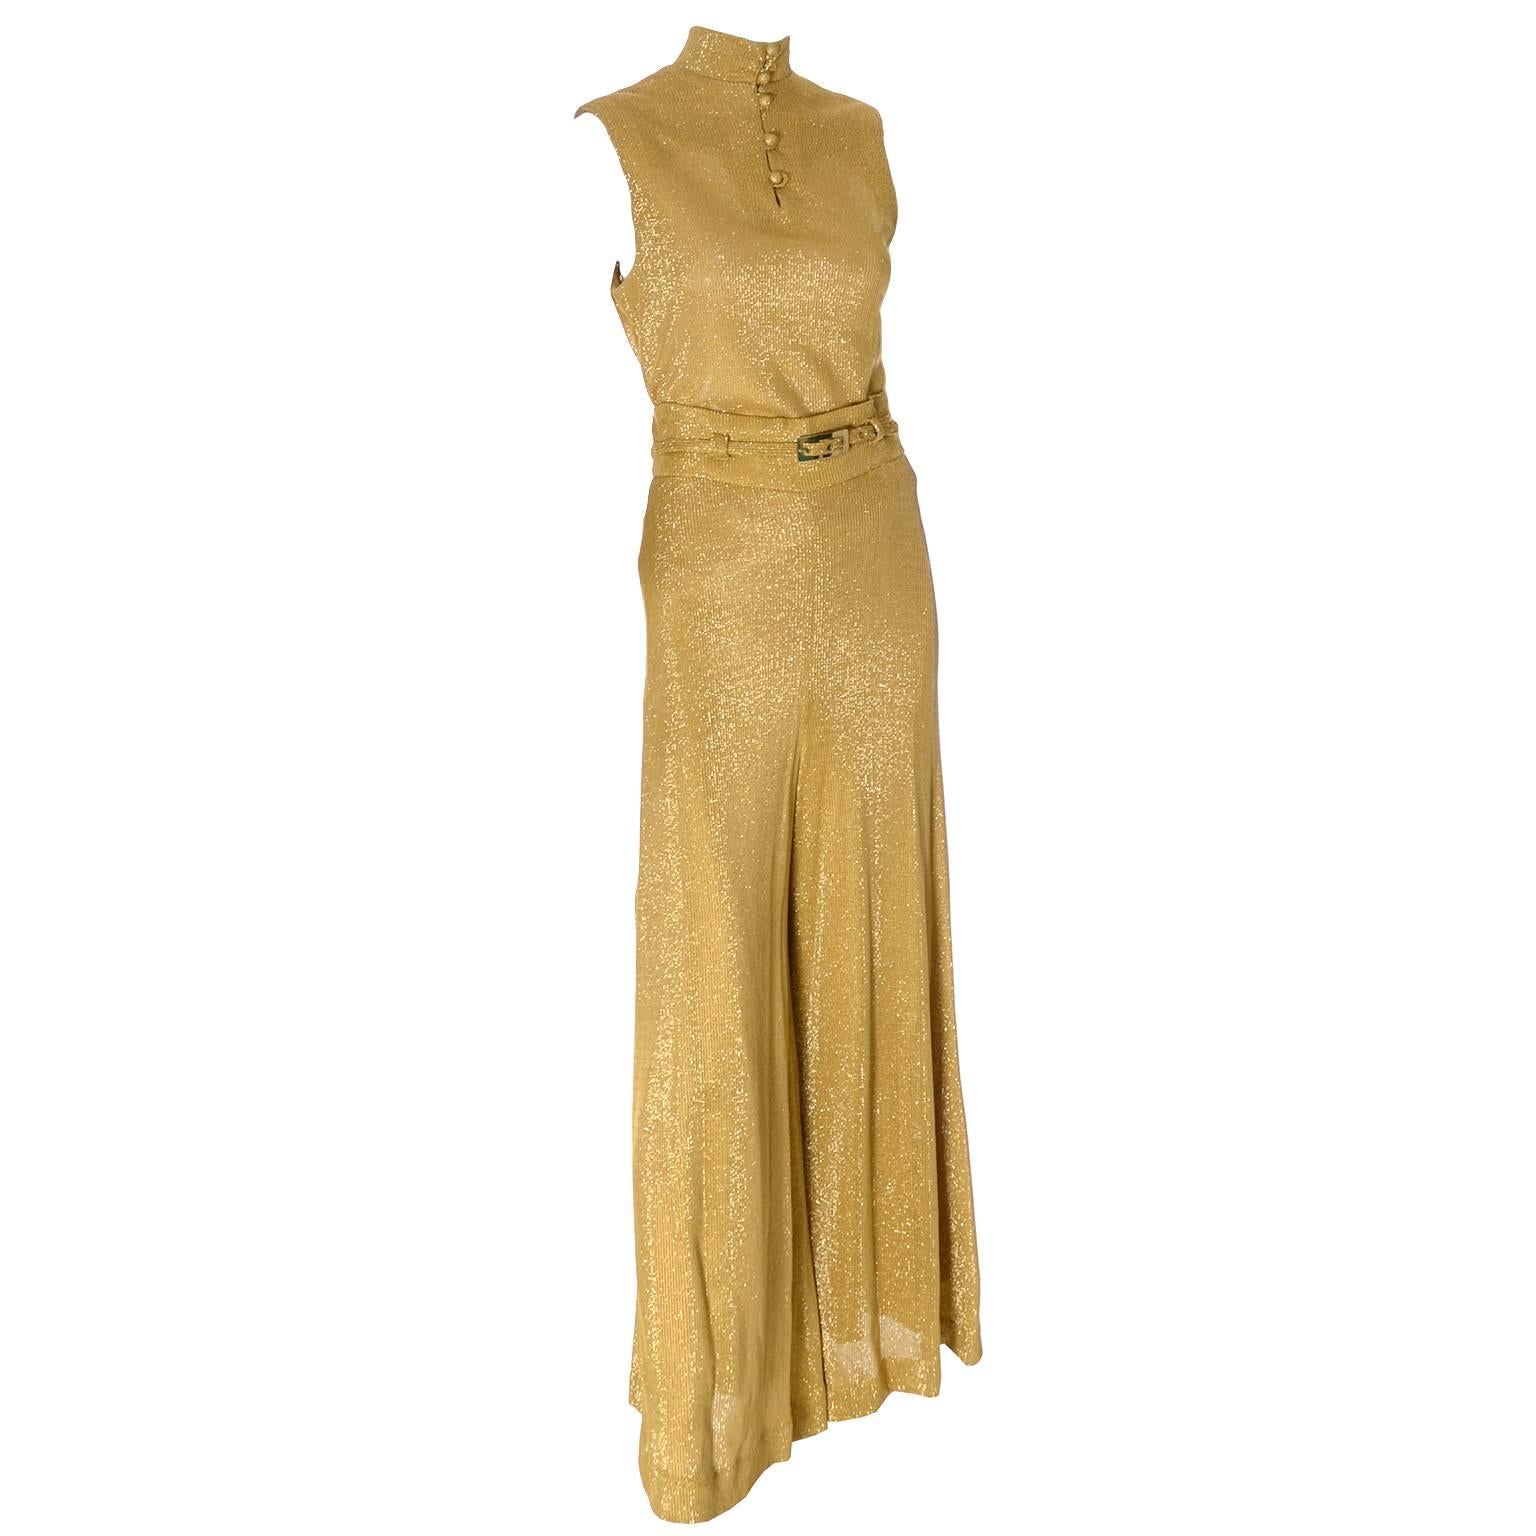 Beverly Paige Vintage Gold Metallic High Waisted Wide Leg Palazzo Pants Outfit